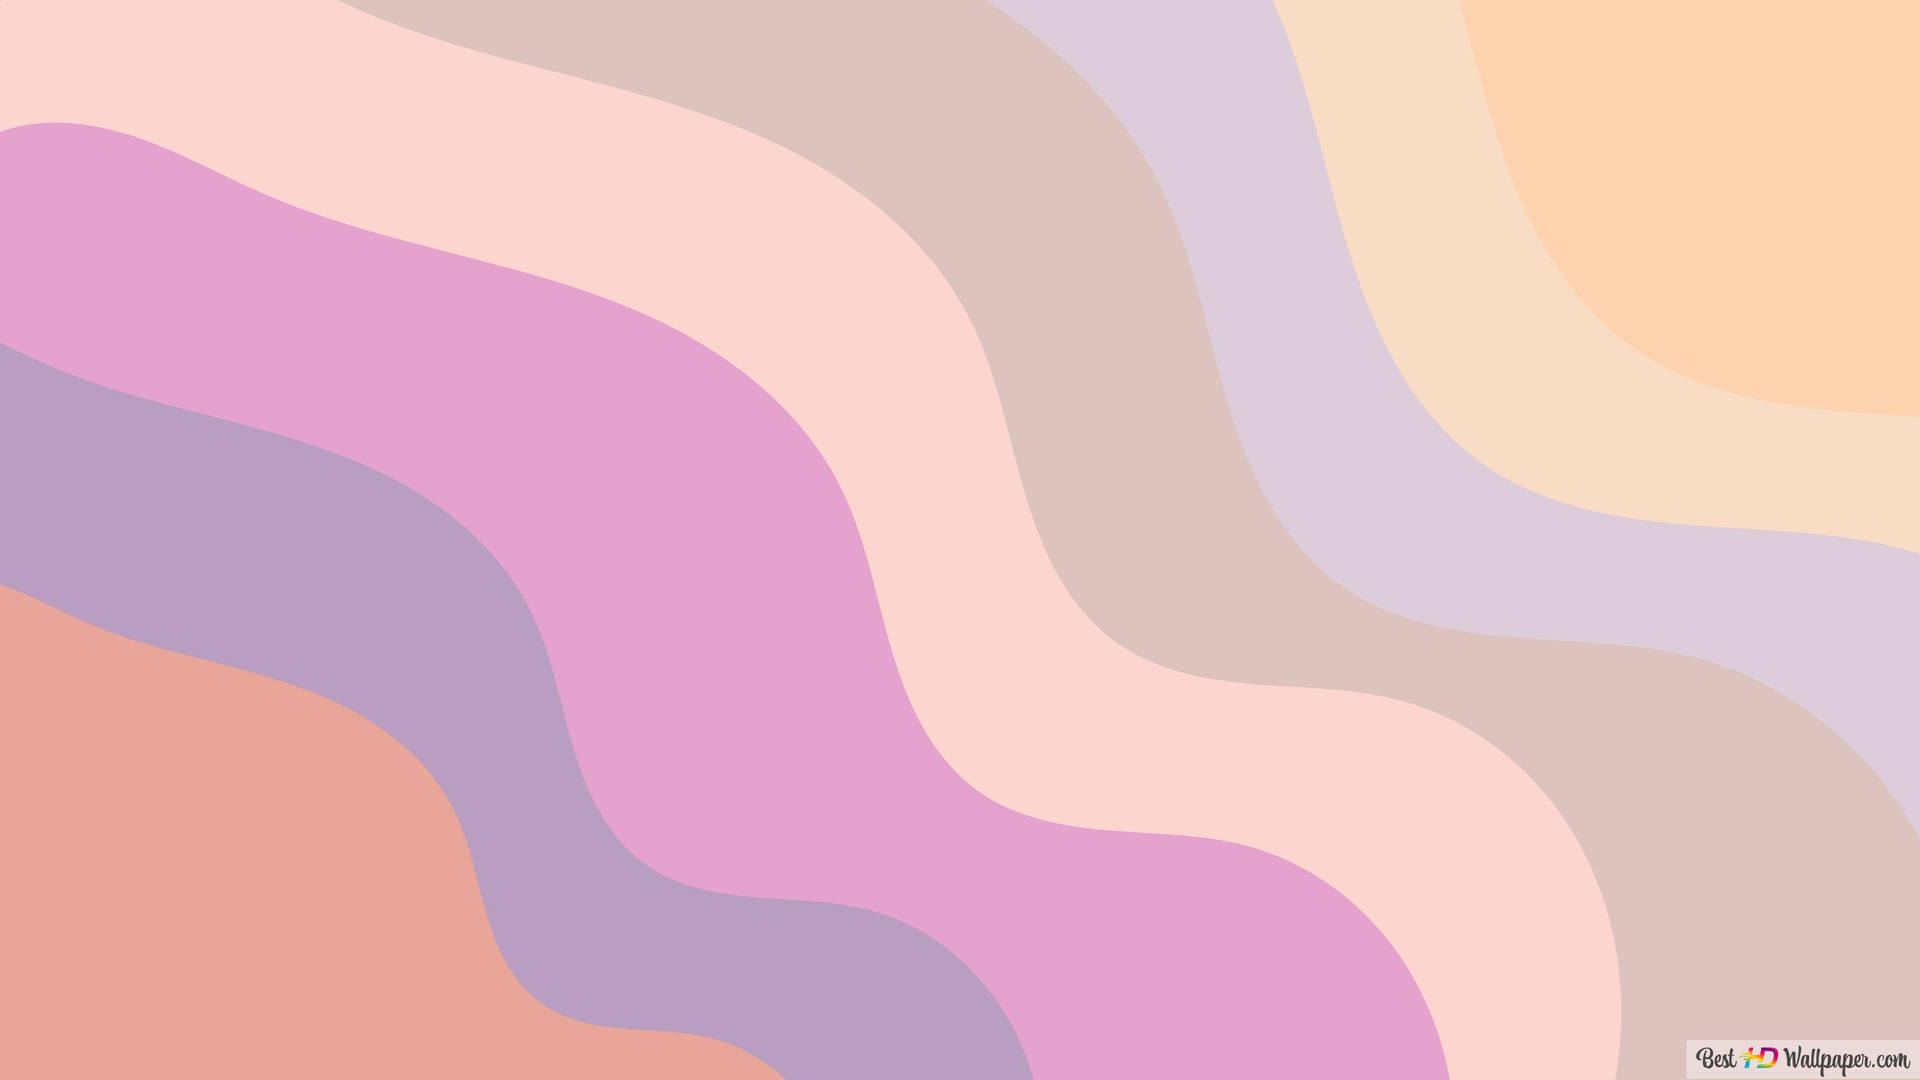 Multicolored Pastel Swirls Come Together To Create A Unique Abstract Artwork Wallpaper